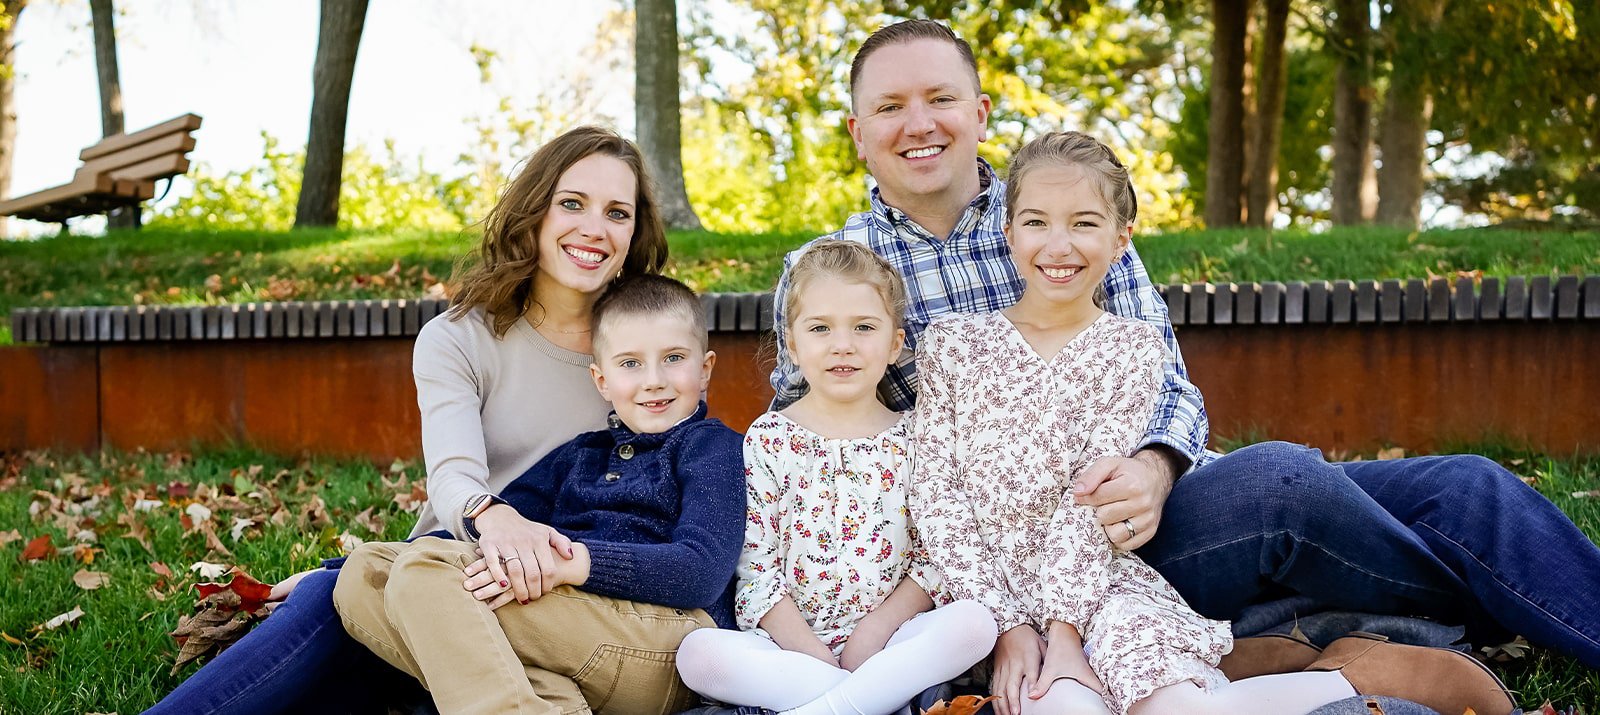 Dentist in Rochester Minnesota smiling outdoors with wife and three children